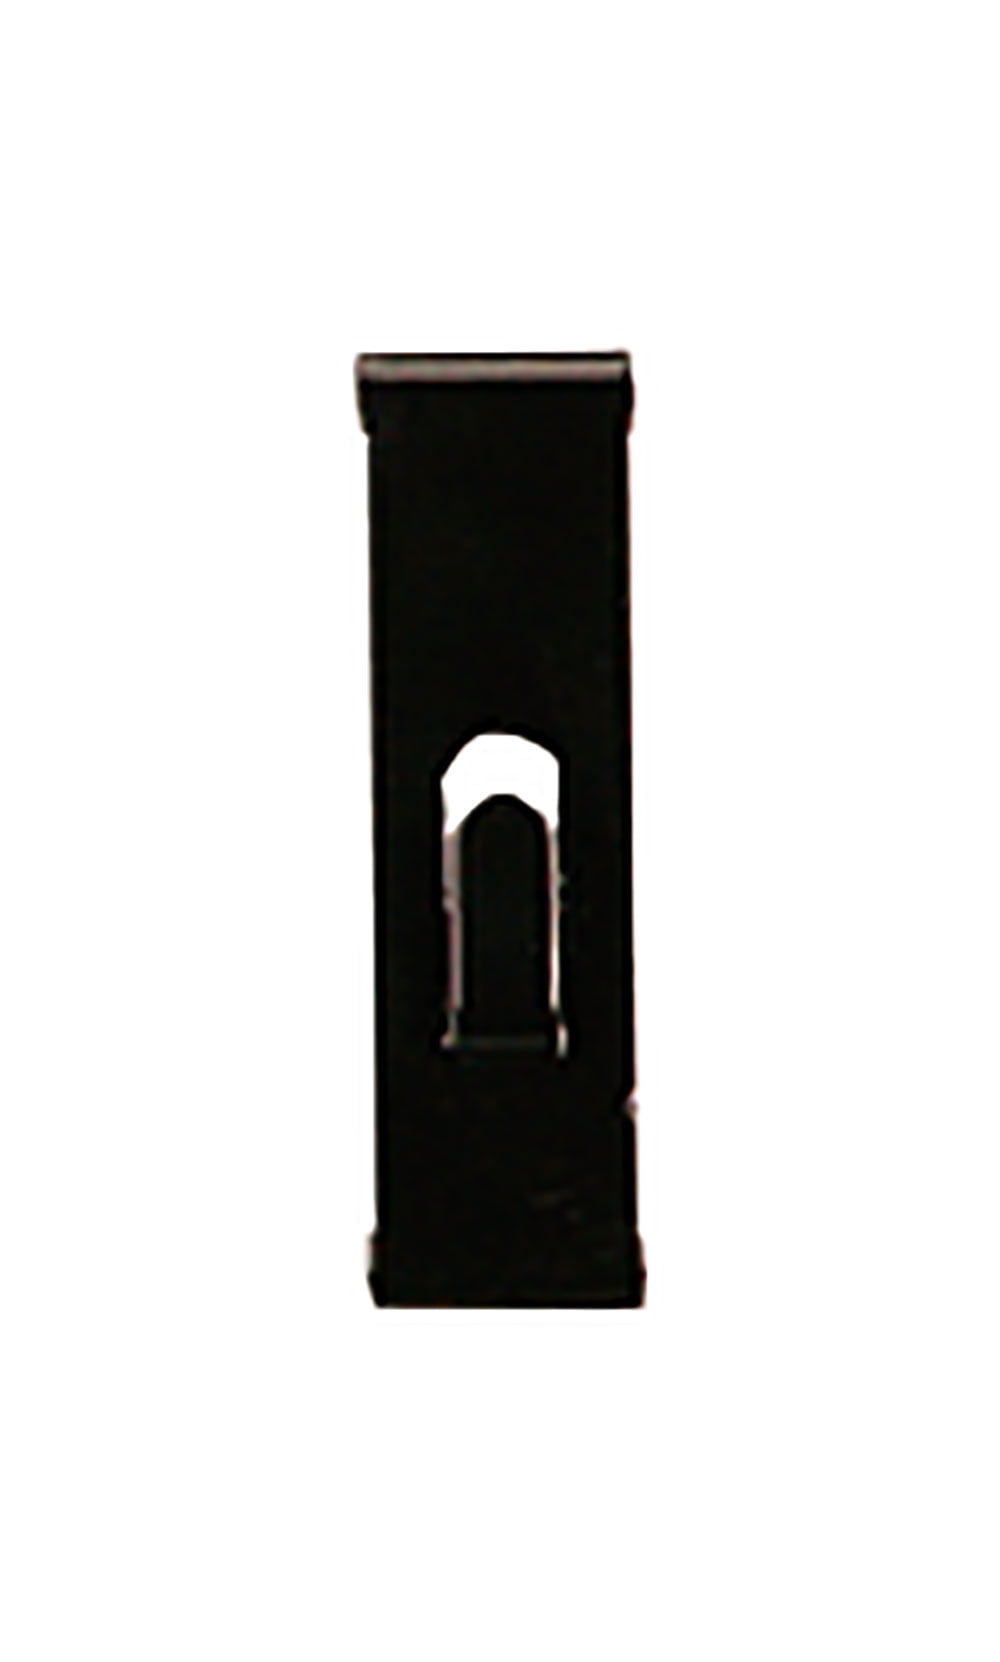 Black Notch Hook for Wire Grid 1/4" Notch Depth Pack of 50